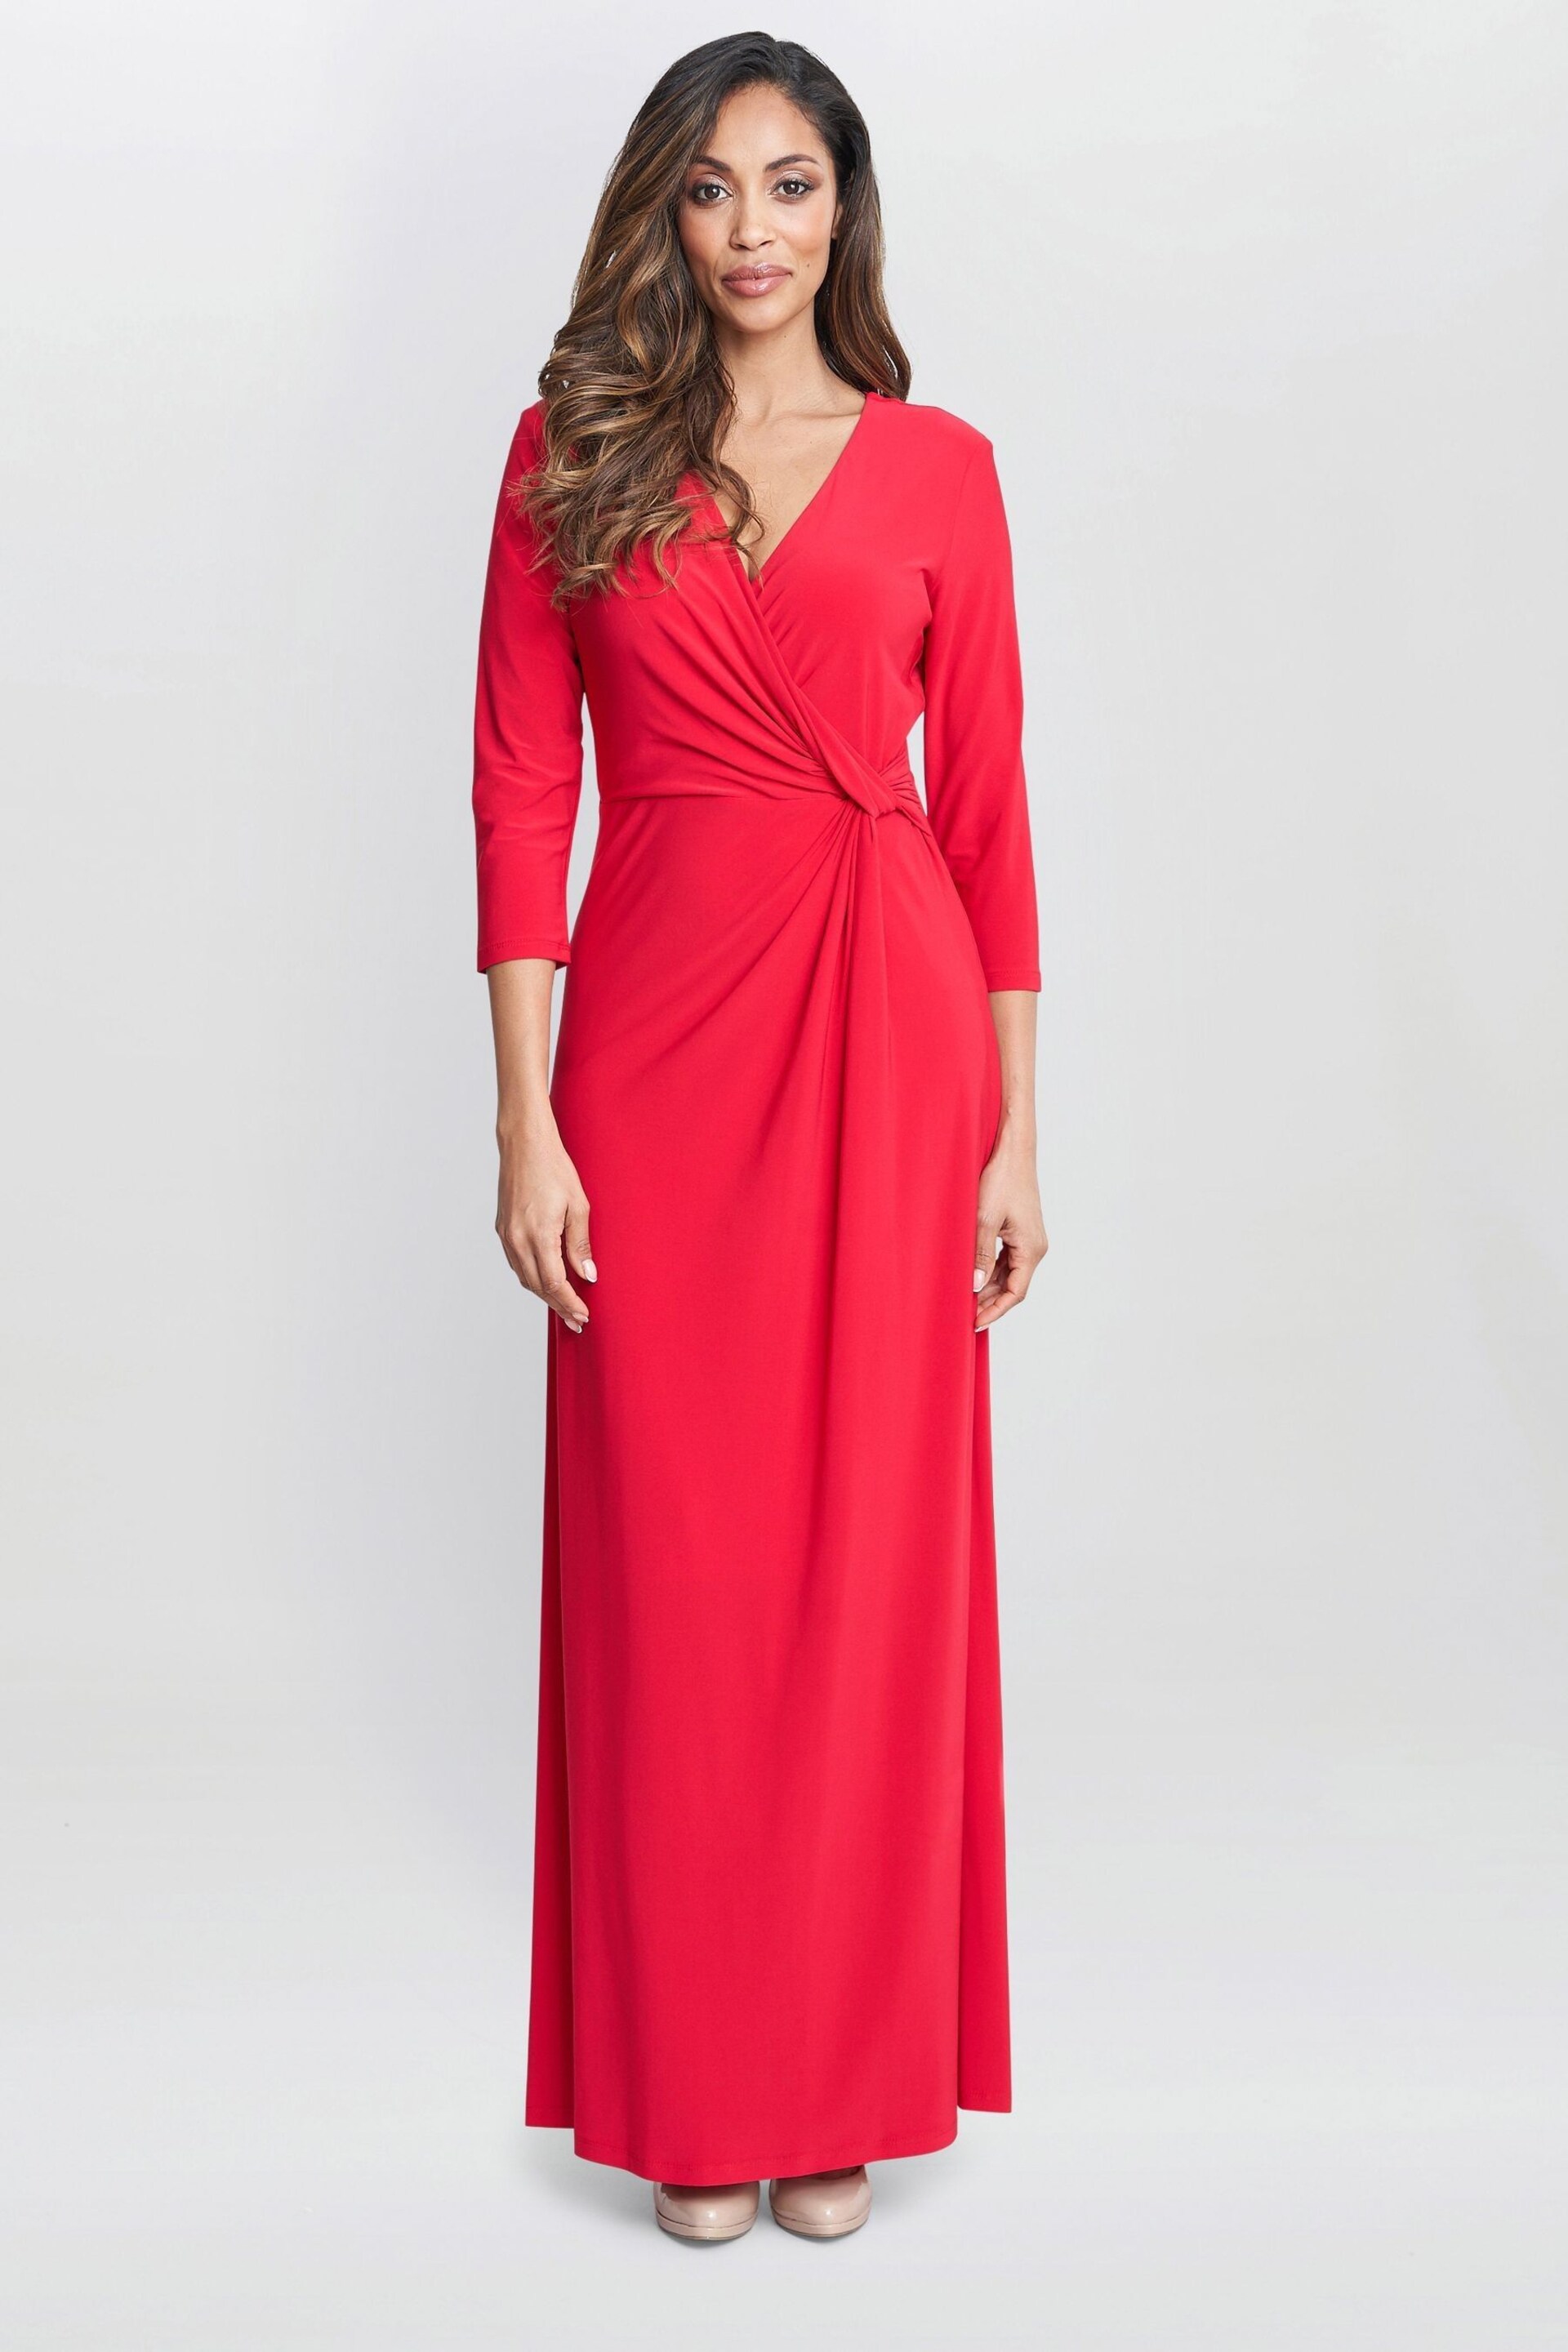 Gina Bacconi Red Celine Jersey Wrap Maxi Dress - Image 1 of 5